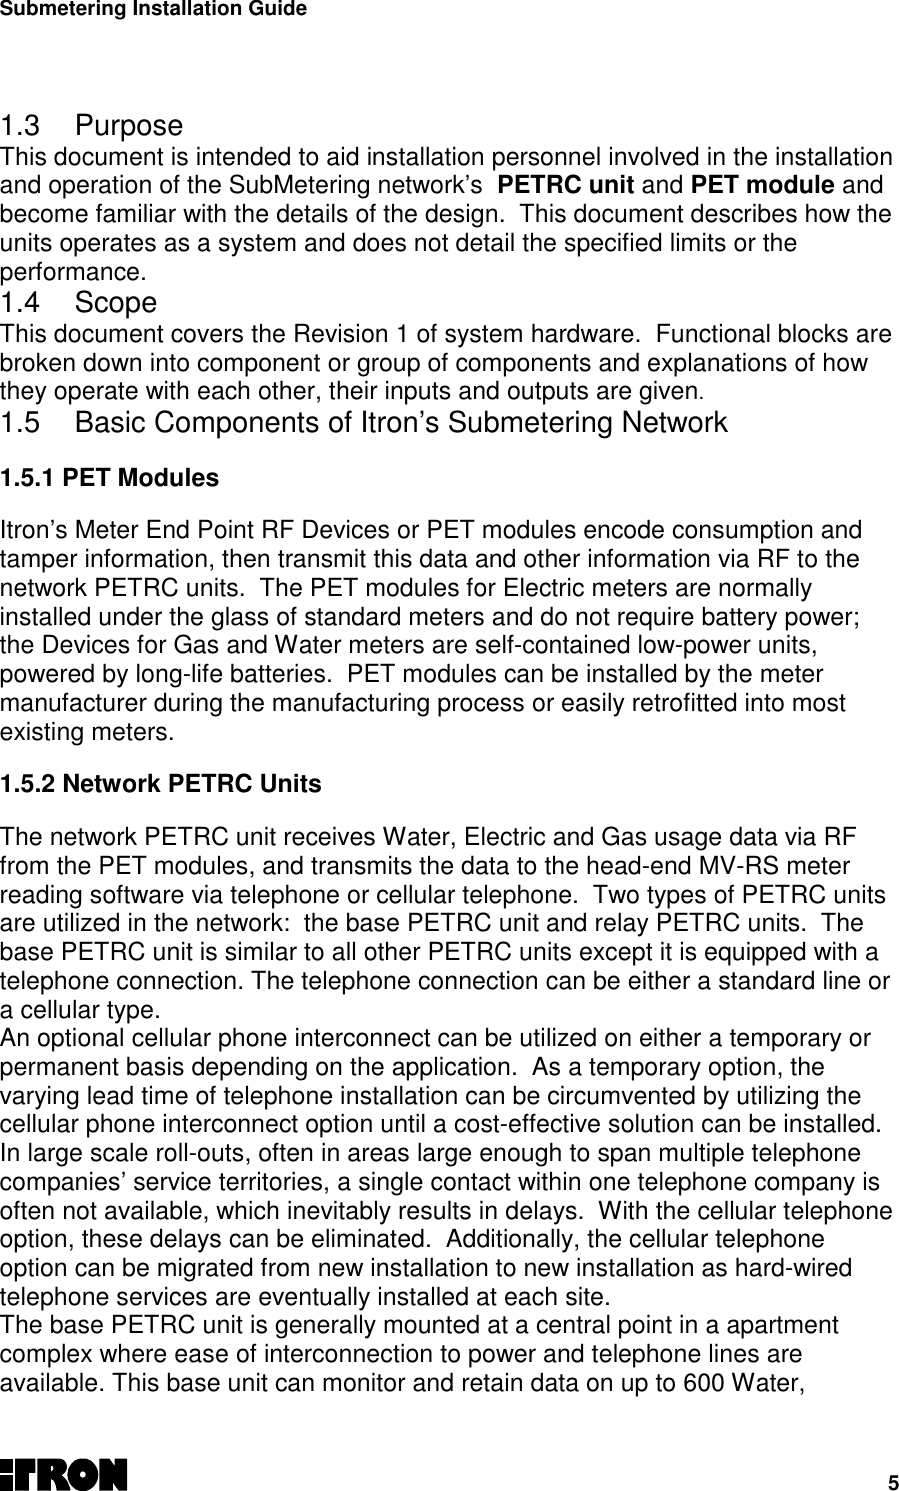 Submetering Installation Guide51.3 PurposeThis document is intended to aid installation personnel involved in the installationand operation of the SubMetering network’s  PETRC unit and PET module andbecome familiar with the details of the design.  This document describes how theunits operates as a system and does not detail the specified limits or theperformance.1.4 ScopeThis document covers the Revision 1 of system hardware.  Functional blocks arebroken down into component or group of components and explanations of howthey operate with each other, their inputs and outputs are given.1.5  Basic Components of Itron’s Submetering Network1.5.1 PET ModulesItron’s Meter End Point RF Devices or PET modules encode consumption andtamper information, then transmit this data and other information via RF to thenetwork PETRC units.  The PET modules for Electric meters are normallyinstalled under the glass of standard meters and do not require battery power;the Devices for Gas and Water meters are self-contained low-power units,powered by long-life batteries.  PET modules can be installed by the metermanufacturer during the manufacturing process or easily retrofitted into mostexisting meters.1.5.2 Network PETRC UnitsThe network PETRC unit receives Water, Electric and Gas usage data via RFfrom the PET modules, and transmits the data to the head-end MV-RS meterreading software via telephone or cellular telephone.  Two types of PETRC unitsare utilized in the network:  the base PETRC unit and relay PETRC units.  Thebase PETRC unit is similar to all other PETRC units except it is equipped with atelephone connection. The telephone connection can be either a standard line ora cellular type.An optional cellular phone interconnect can be utilized on either a temporary orpermanent basis depending on the application.  As a temporary option, thevarying lead time of telephone installation can be circumvented by utilizing thecellular phone interconnect option until a cost-effective solution can be installed.In large scale roll-outs, often in areas large enough to span multiple telephonecompanies’ service territories, a single contact within one telephone company isoften not available, which inevitably results in delays.  With the cellular telephoneoption, these delays can be eliminated.  Additionally, the cellular telephoneoption can be migrated from new installation to new installation as hard-wiredtelephone services are eventually installed at each site.The base PETRC unit is generally mounted at a central point in a apartmentcomplex where ease of interconnection to power and telephone lines areavailable. This base unit can monitor and retain data on up to 600 Water,